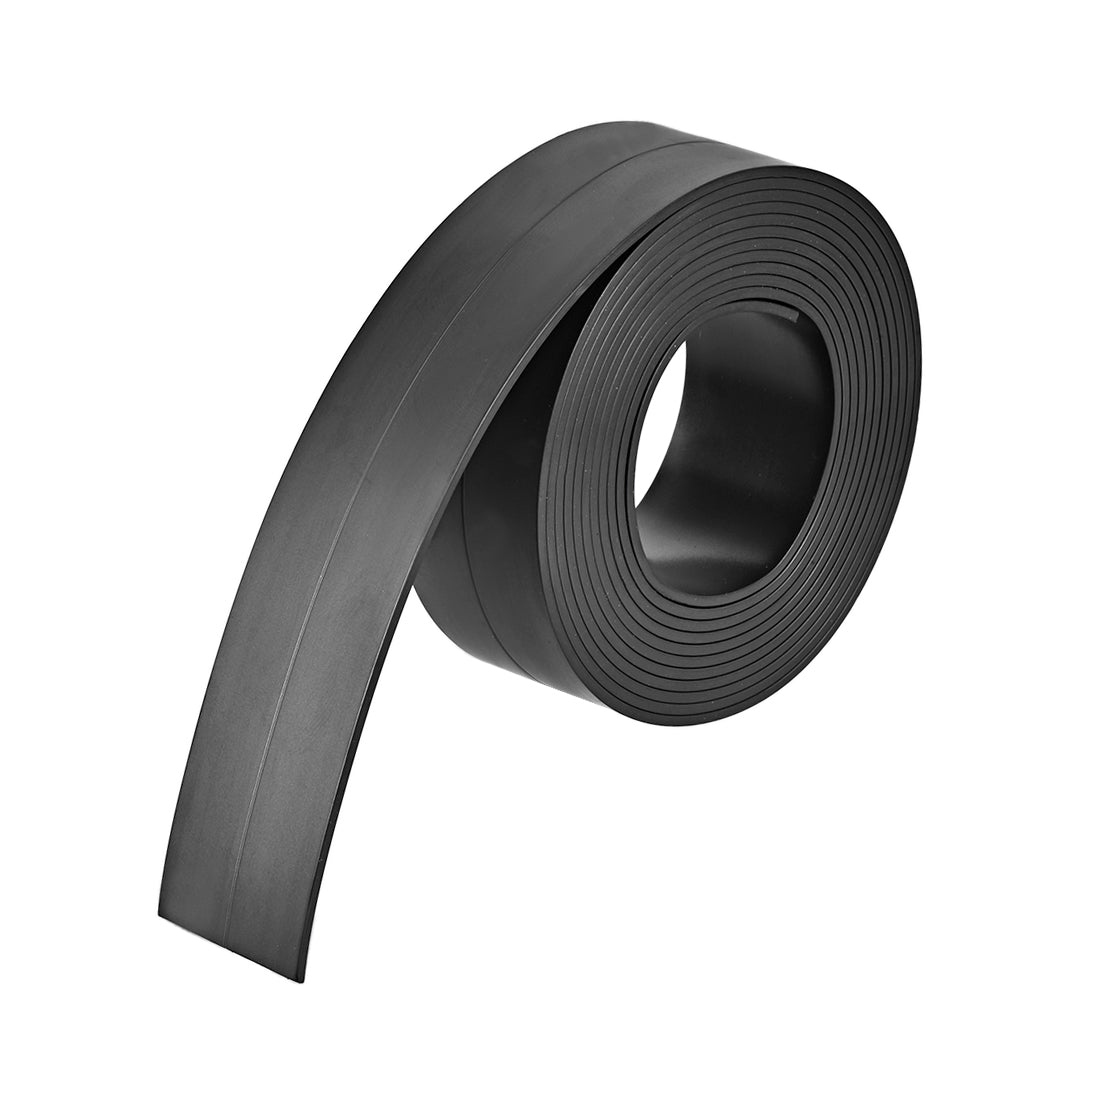 Uxcell Uxcell Black  Magnetic Strip for Crafts, 25/64 Inch x 6.5 Feet